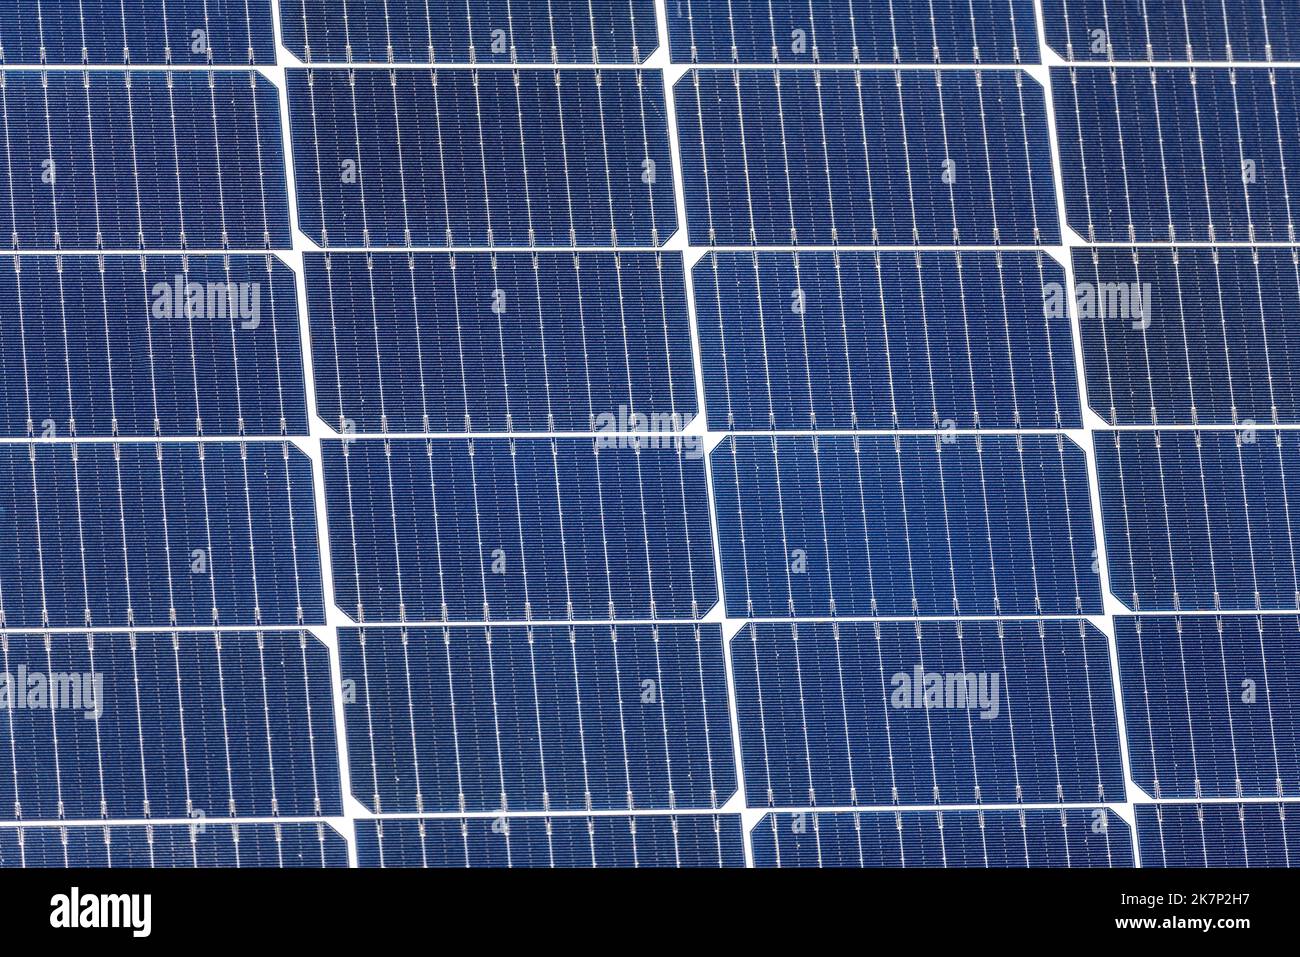 symmetrical cells of a solar panel that are repeated lengthwise and widthwise Stock Photo